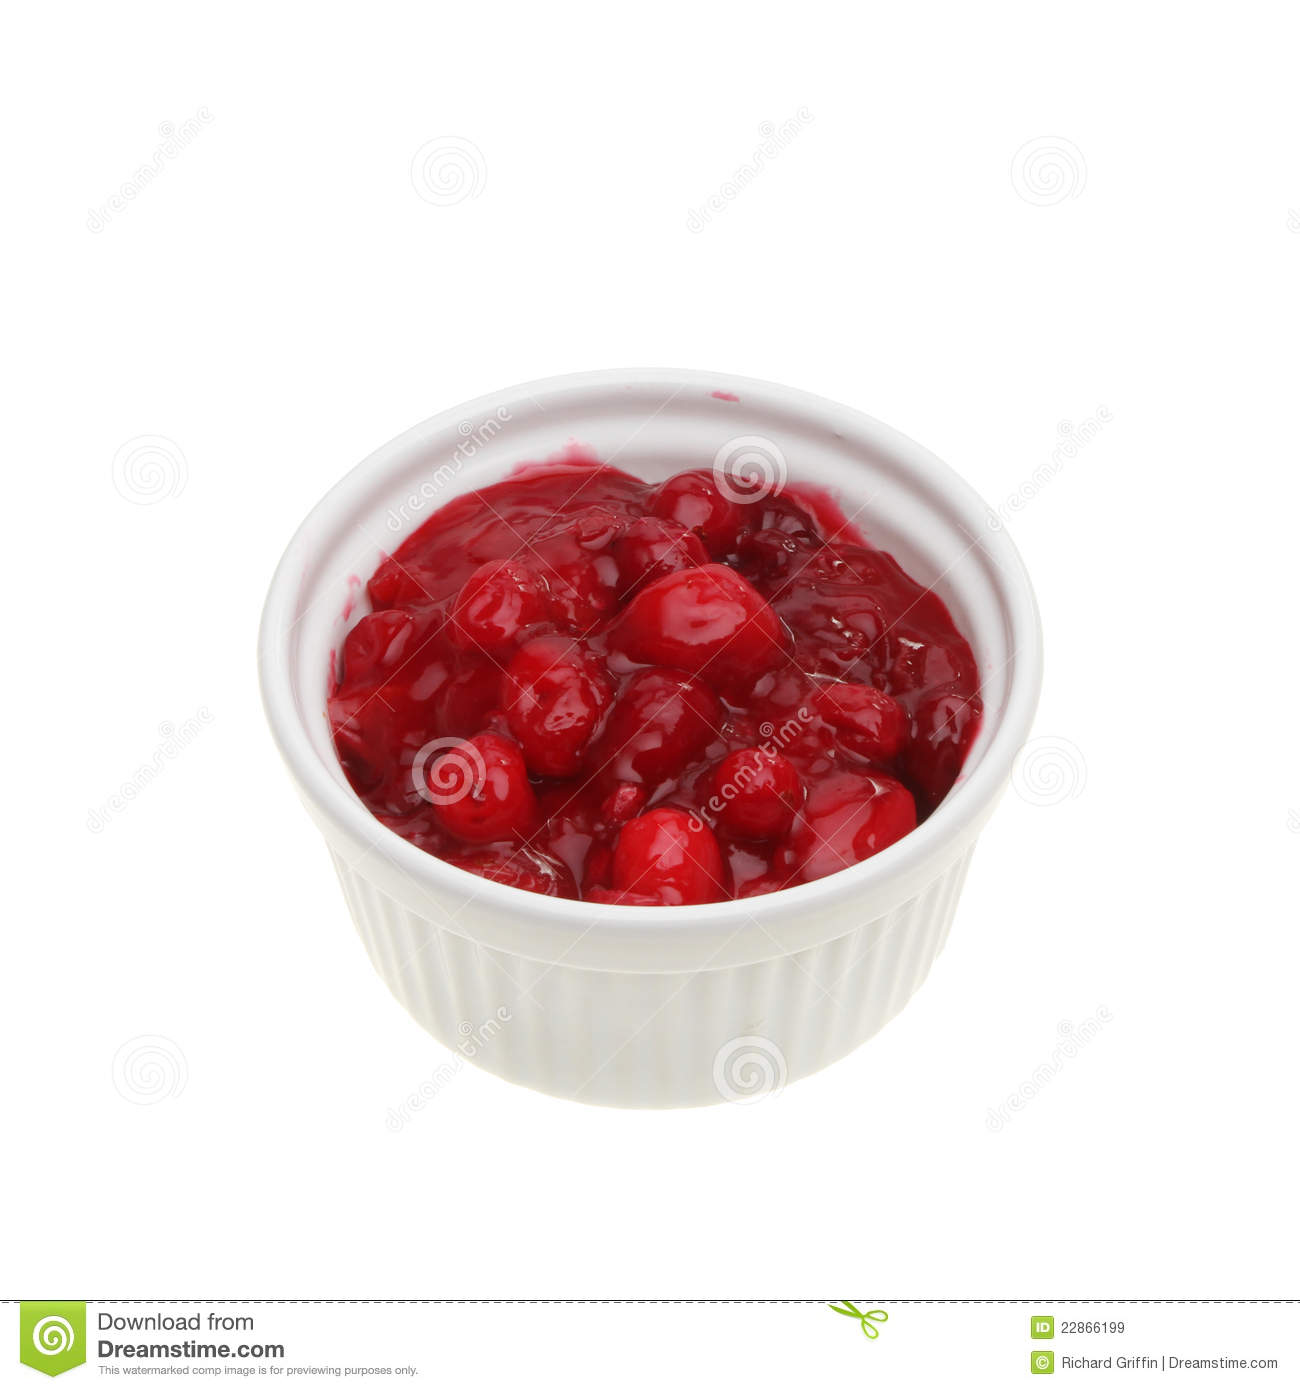 Cranberry Sauce Royalty Free Stock Images   Image  22866199